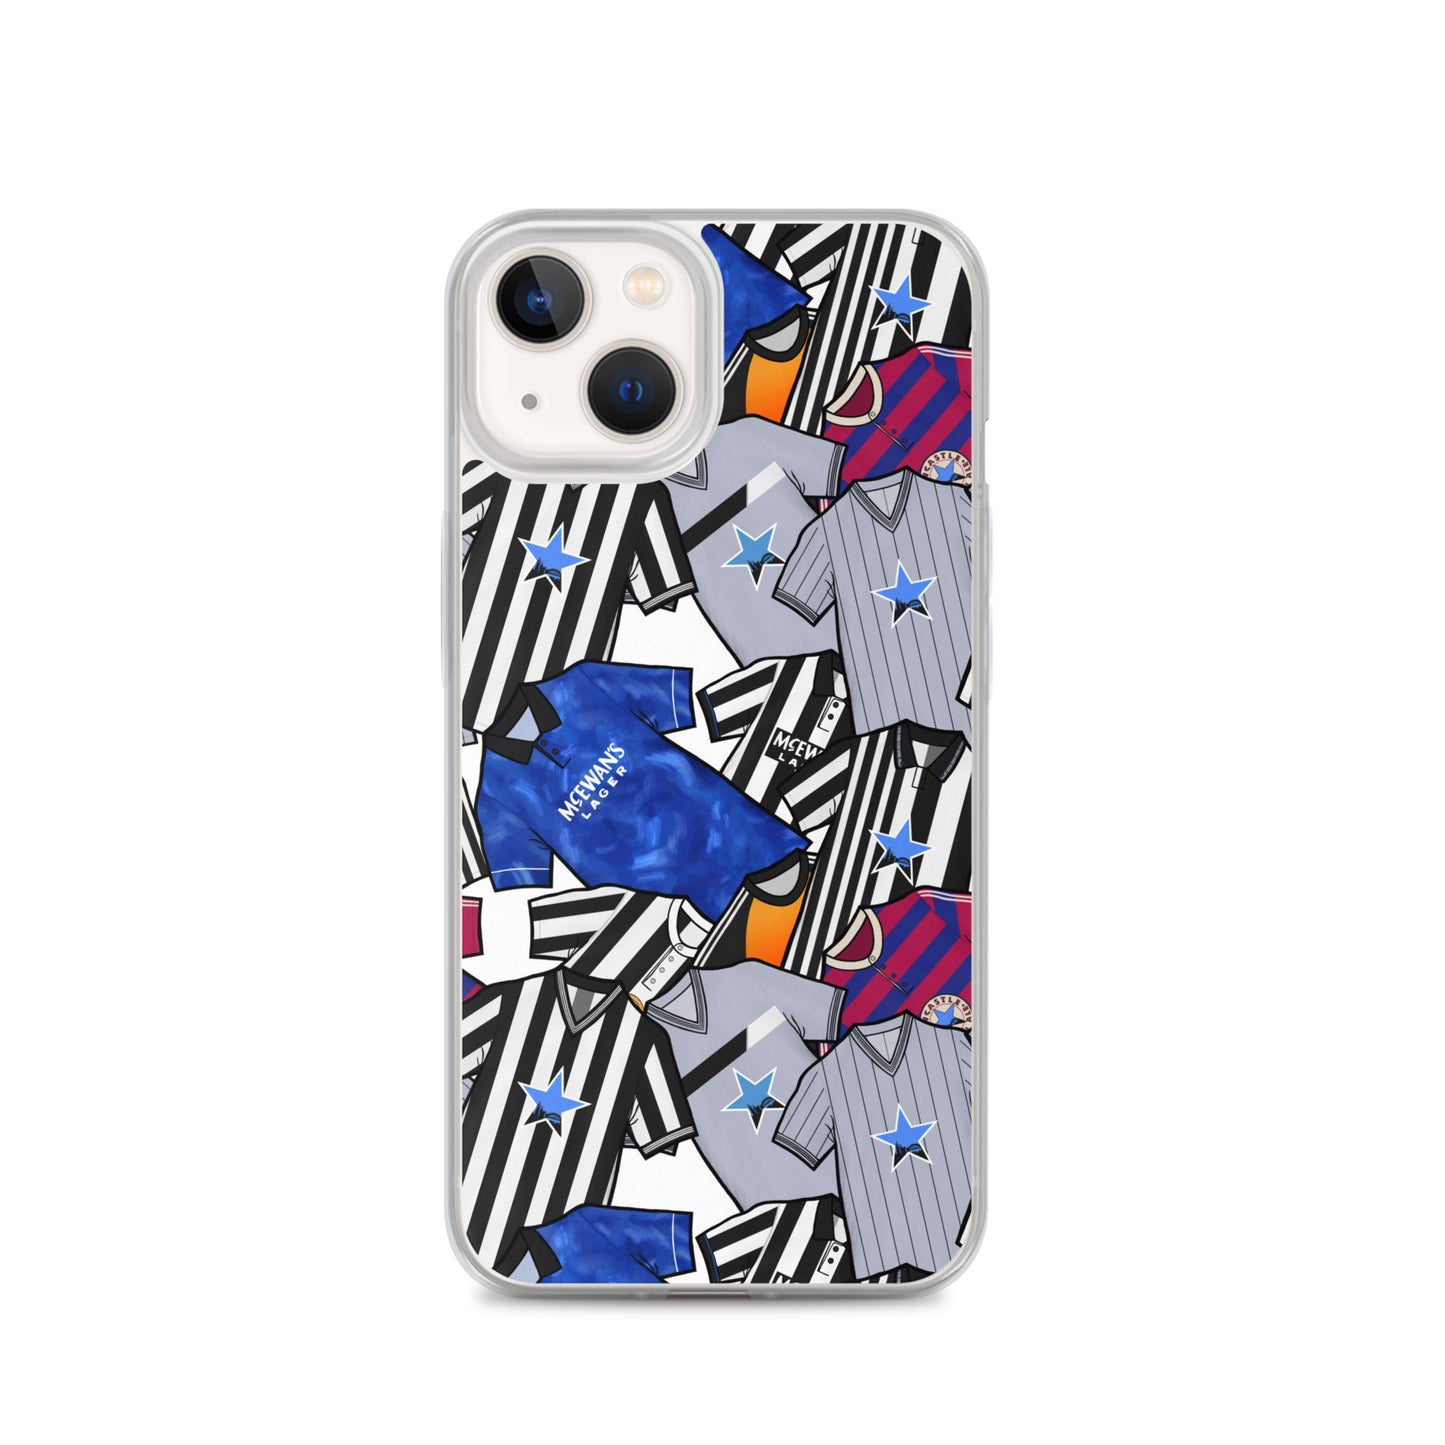 Phone case for iPhone 13 inspired by the Retro shirts of Newcastle United!